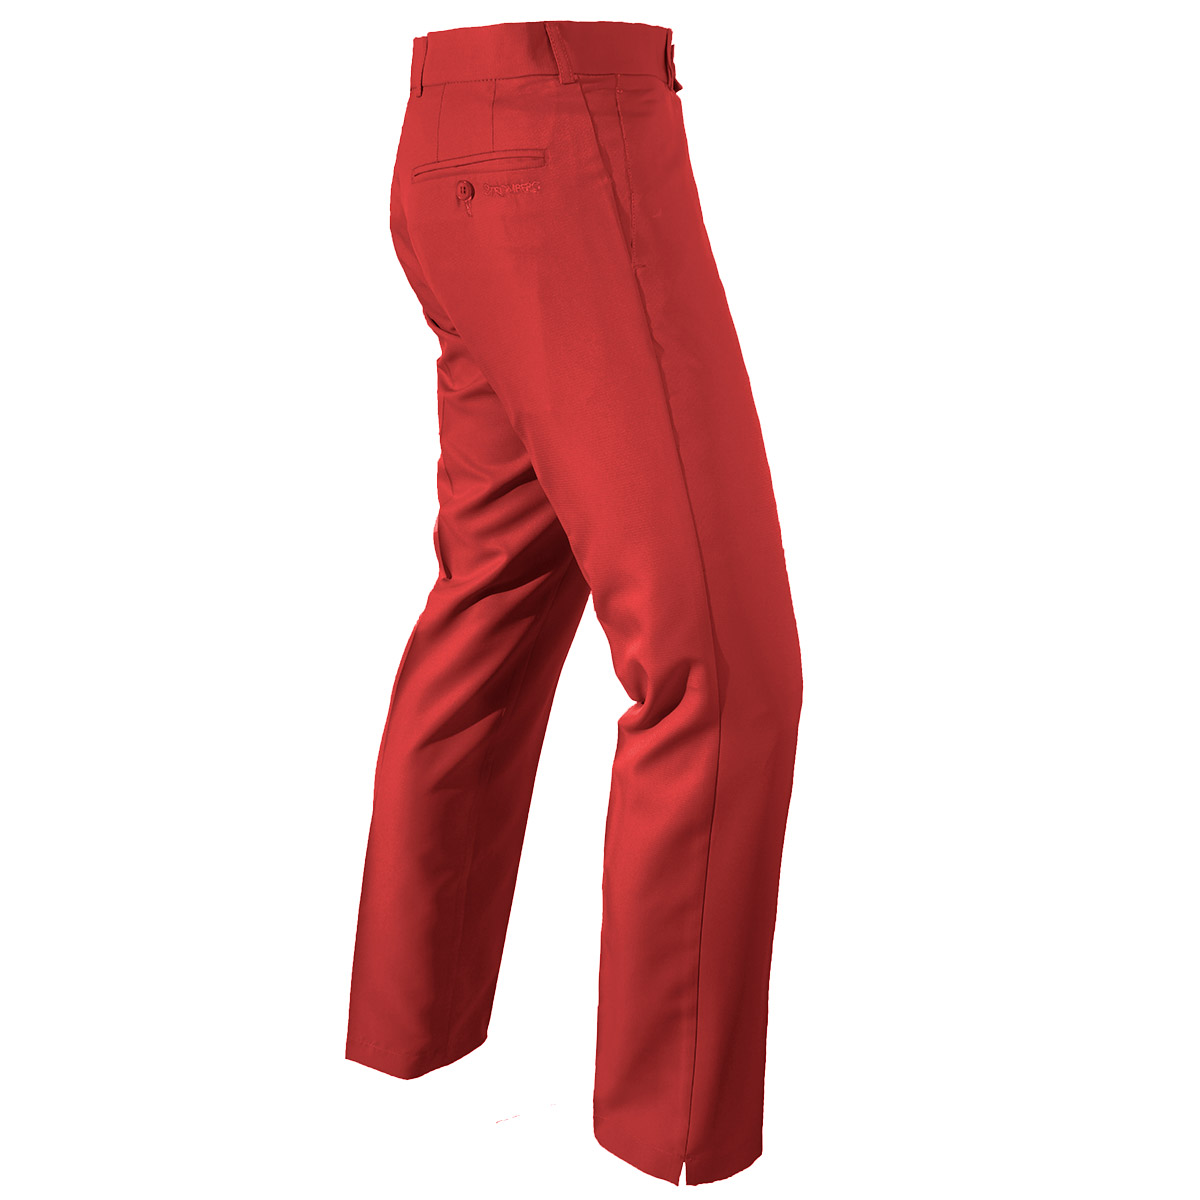 Stromberg Men's Sintra 2.0 Golf Trousers from american golf